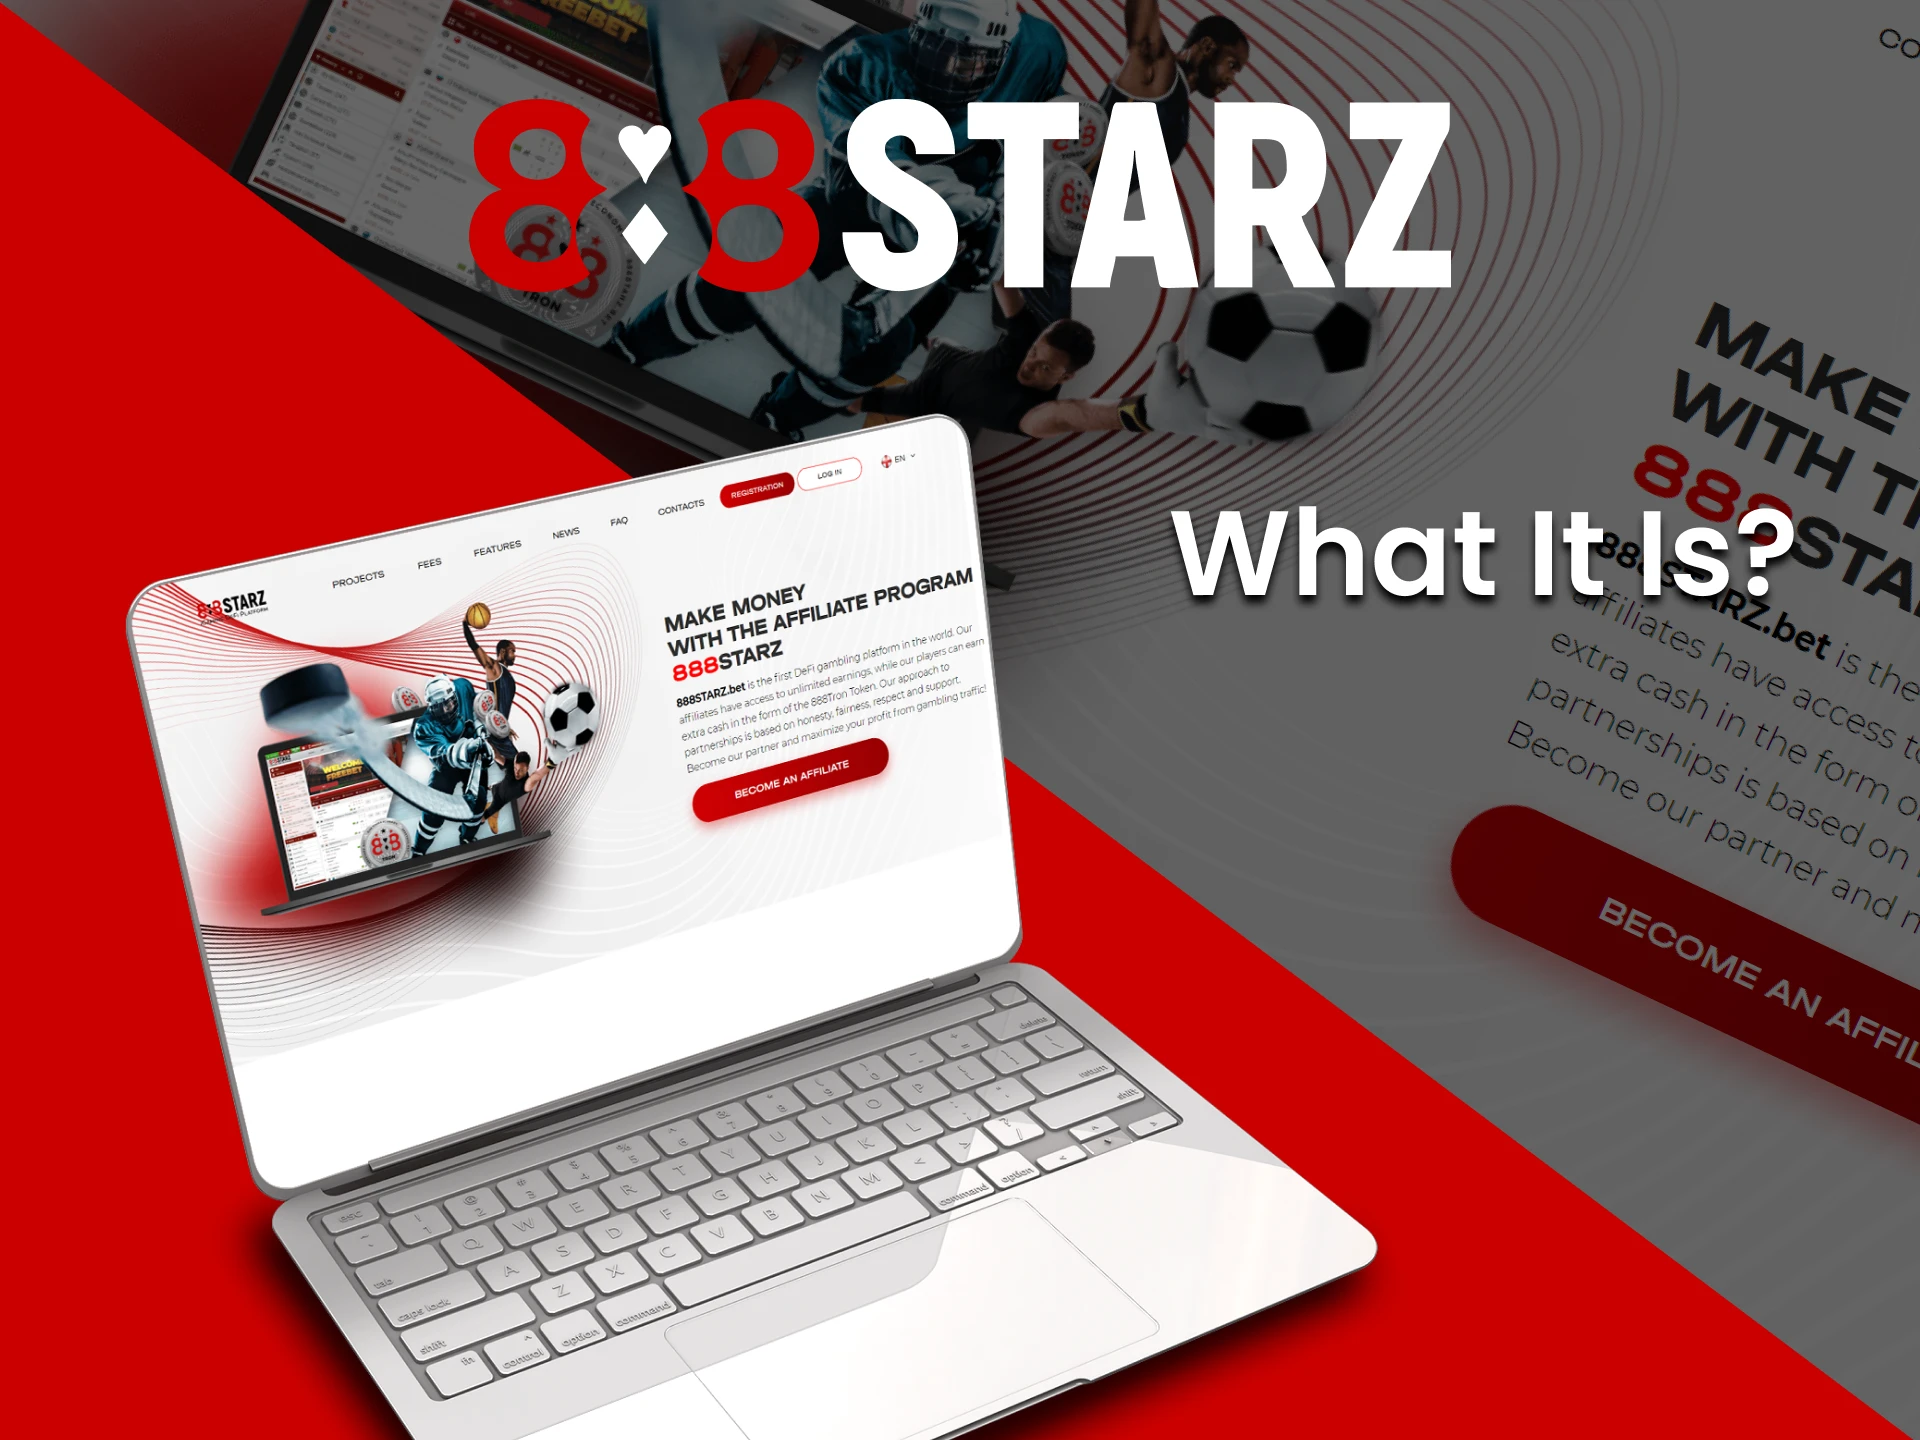 888starz affiliate program is a great opportunity for getting additional bonuses.